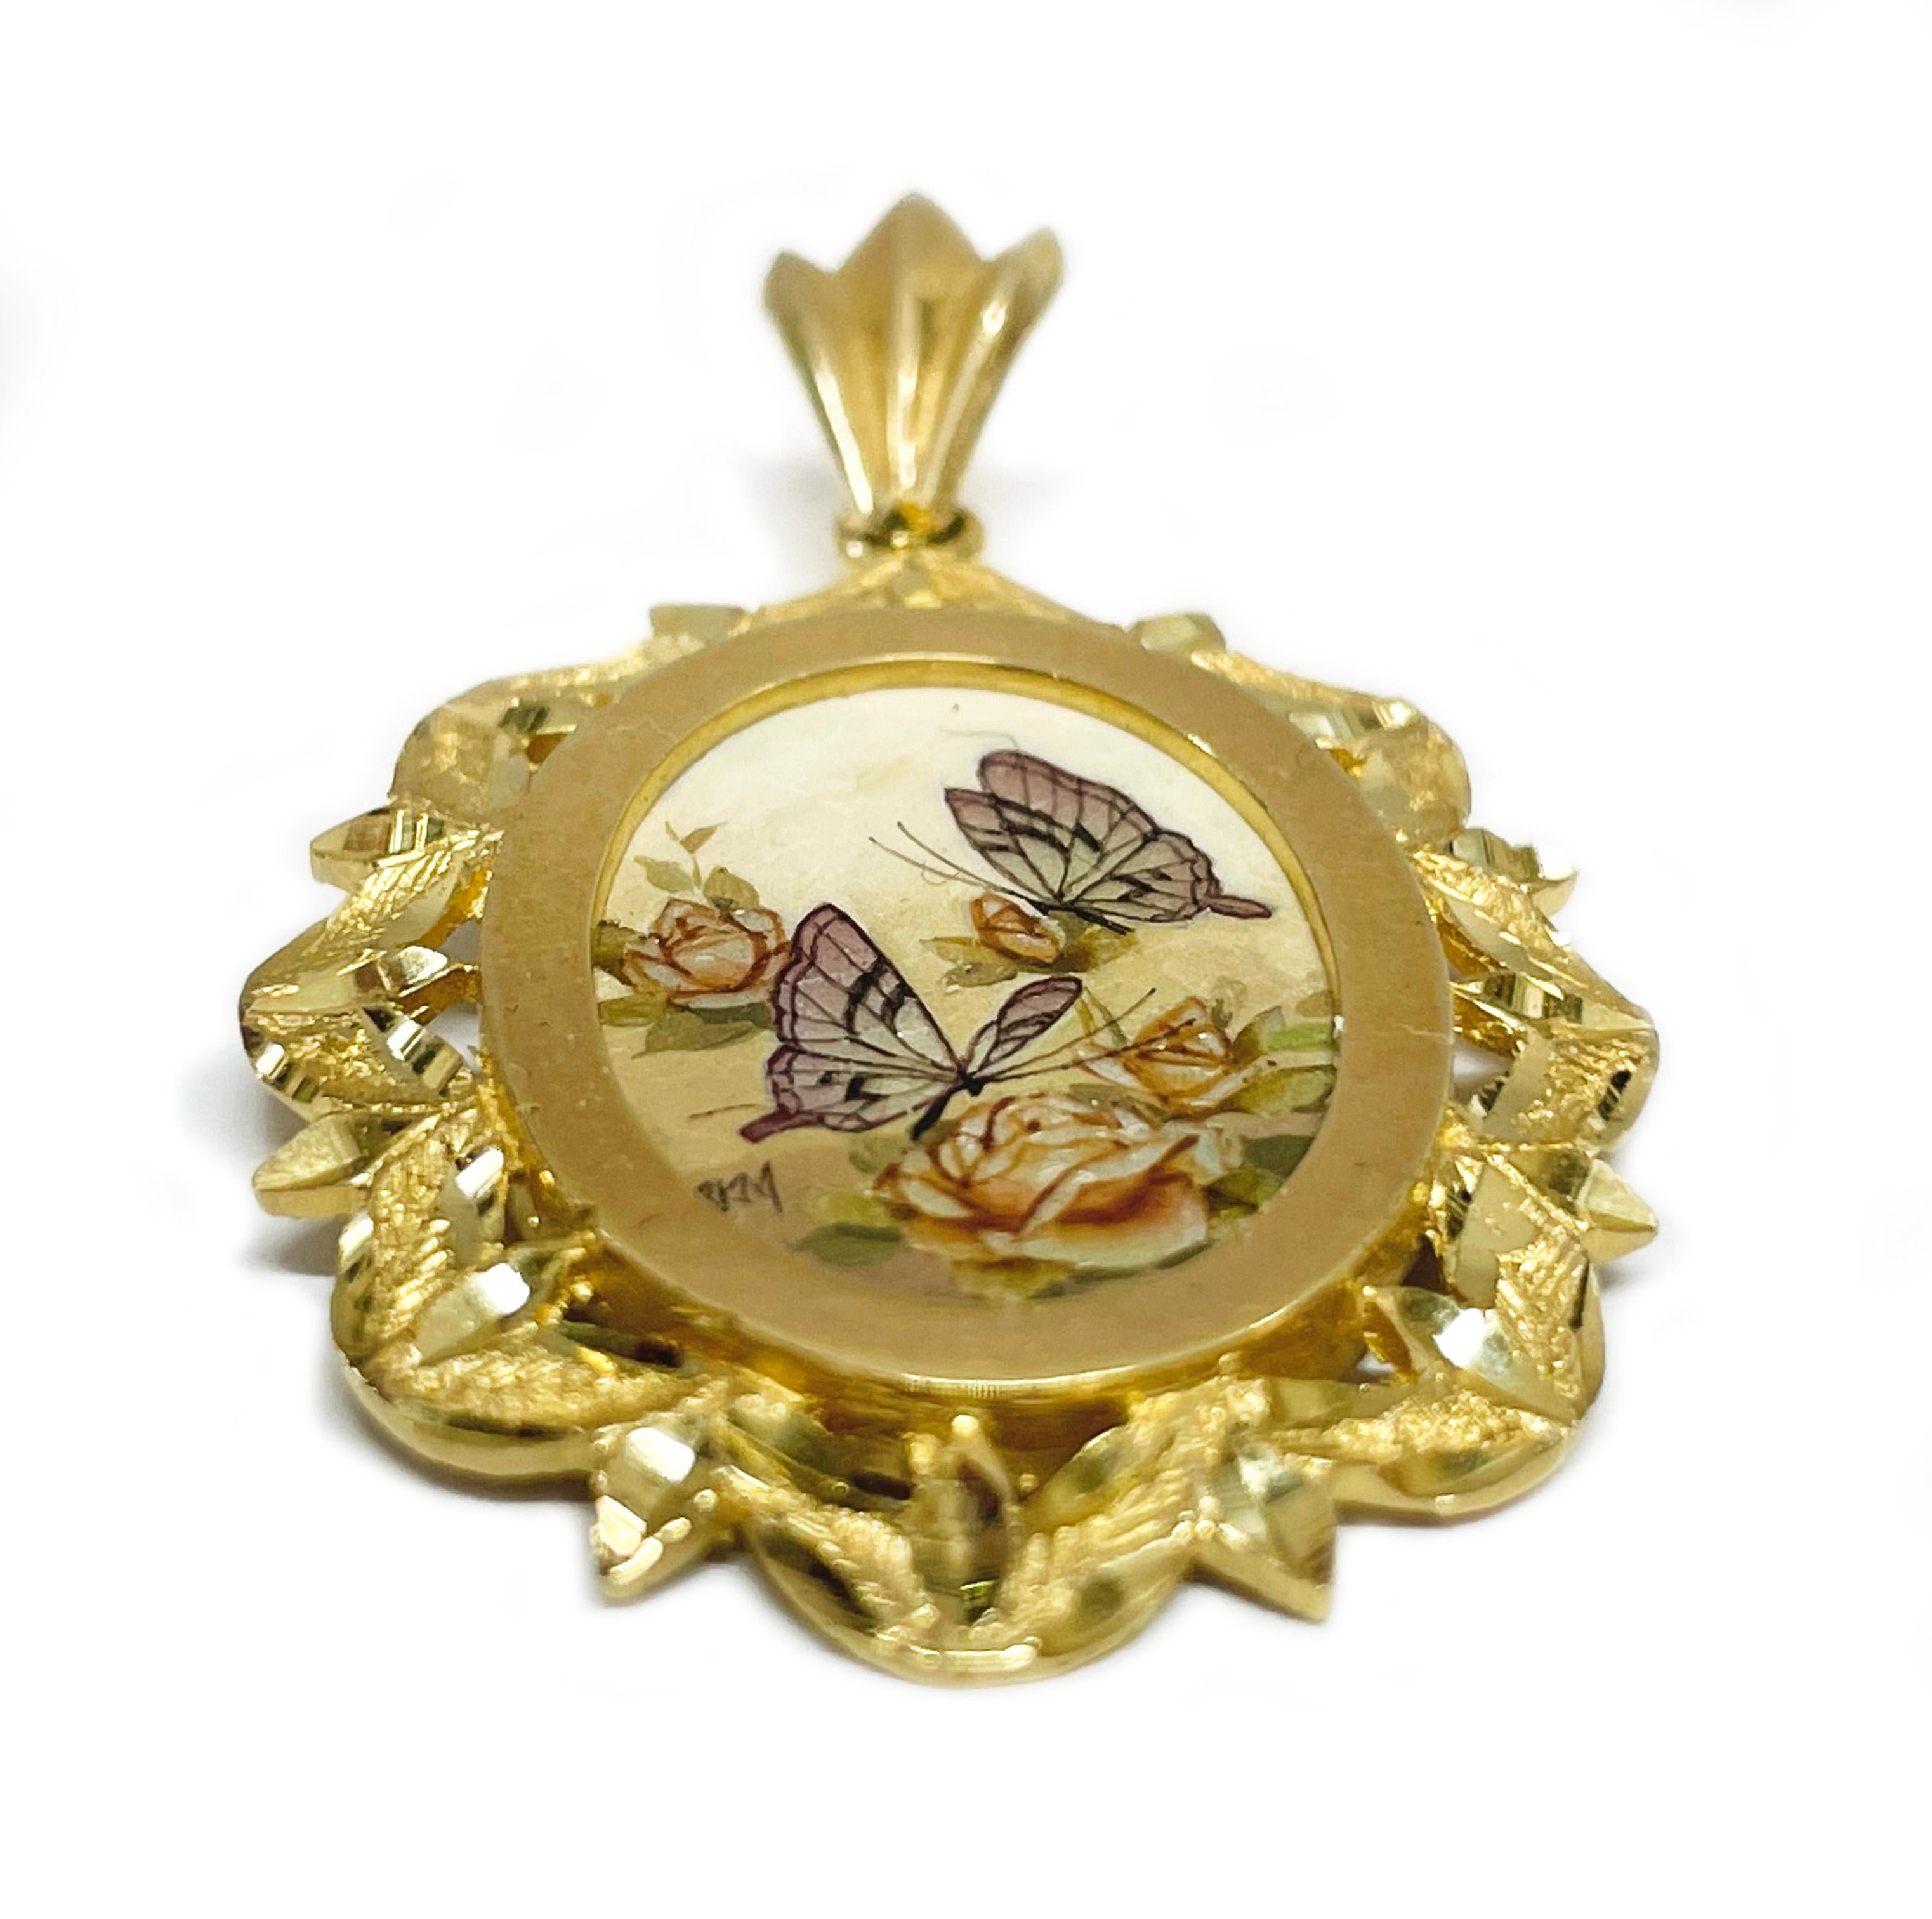 14 Karat Yellow Gold Butterflies and Roses Hand Painted on a Mother of Pearl Pendant. The miniature painting is set in a 14 karat gold ornate oval frame with diamond-cut details. The painting is signed by the master artist, BKM Brian M. The pendant